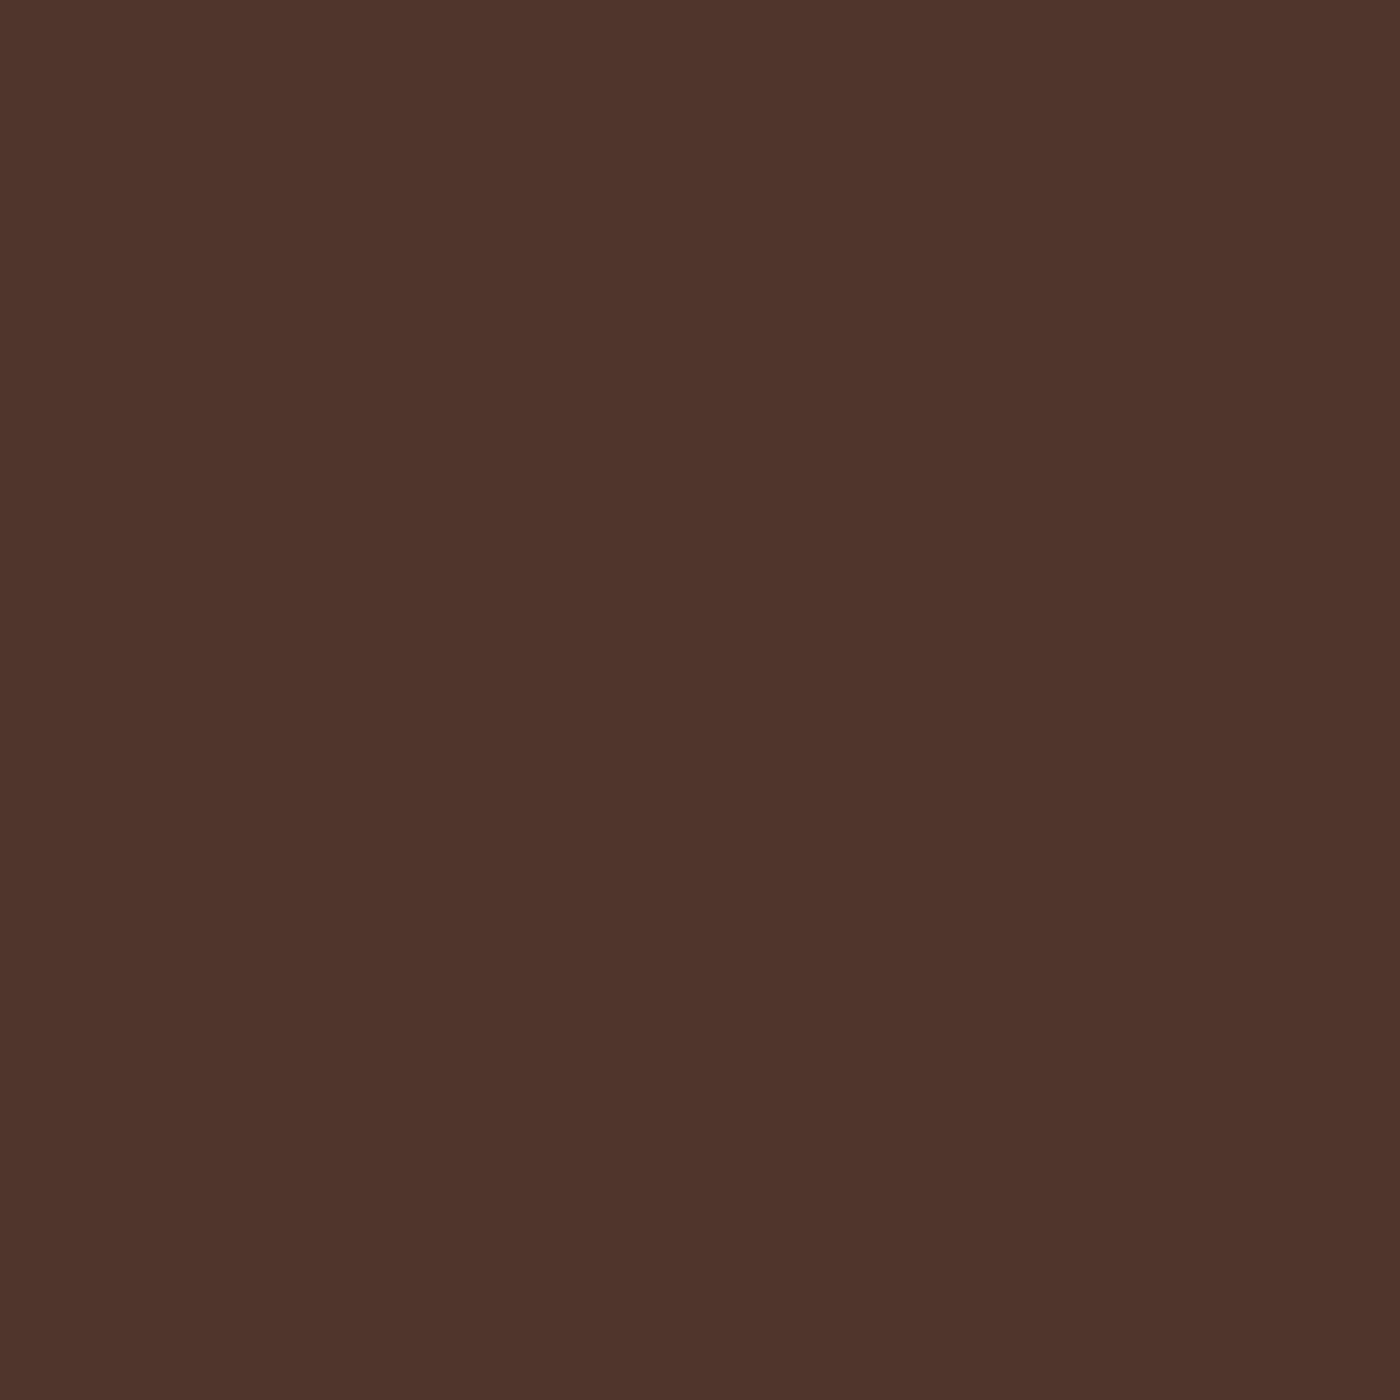 BURNT UMBER- Smooth 12x12 Cardstock - Bazzill Smoothies Collection